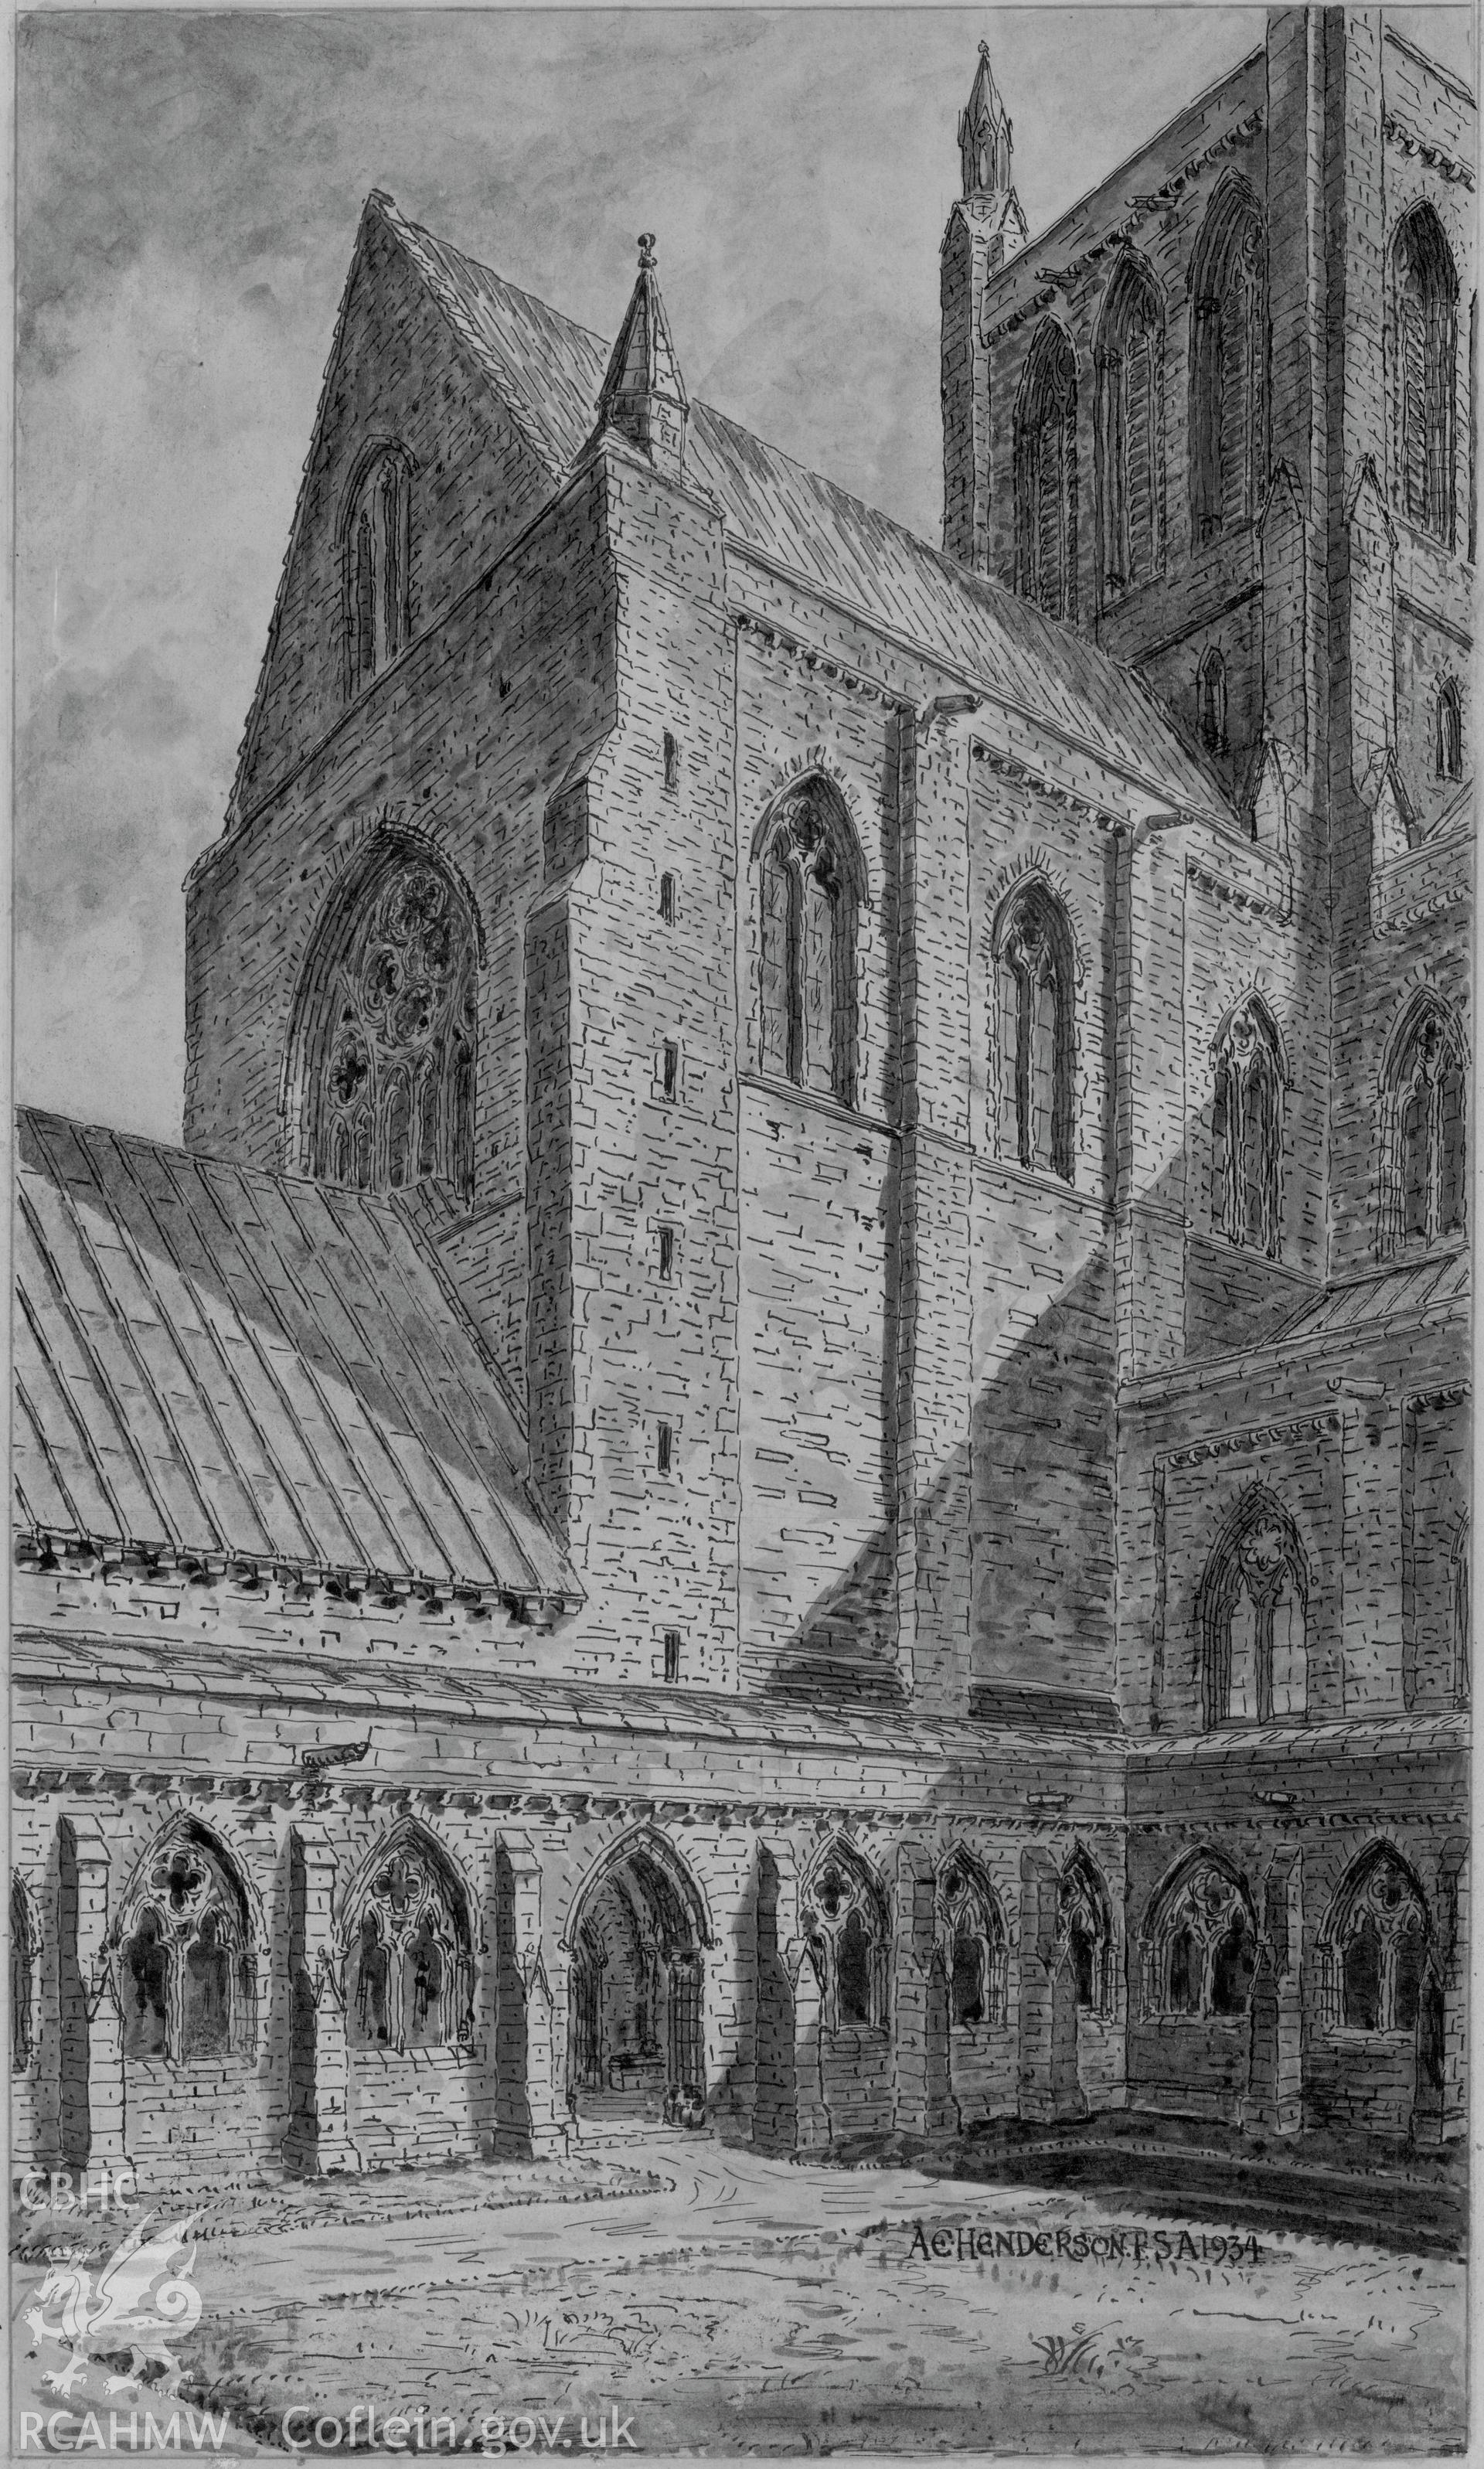 Digital copy of a conjectural reconstruction drawing of 'Tintern Abbey as Erected: Cloister & North Transept Exterior' produced by Arthur E. Henderson, 1934.